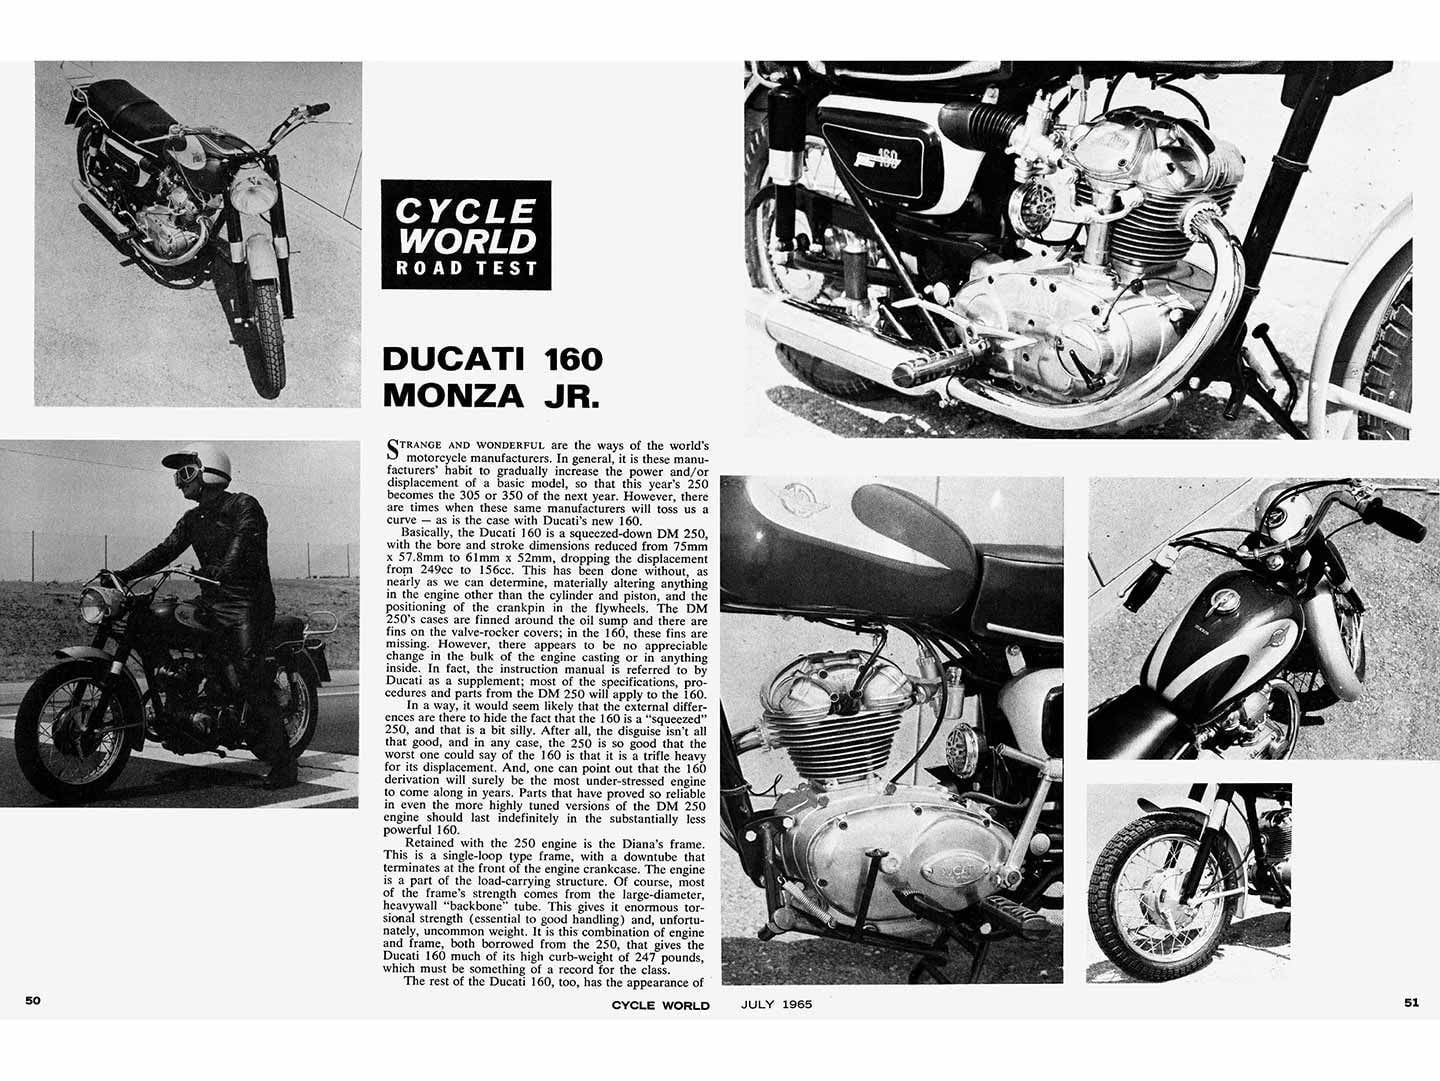 <i>Cycle World</i> road test of the 1965 Ducati 160 Monza Jr. Ducati was first a singles company, and then essentially combined a pair of single top ends on a common crankcase to deliver its first 90-degree V-twin.